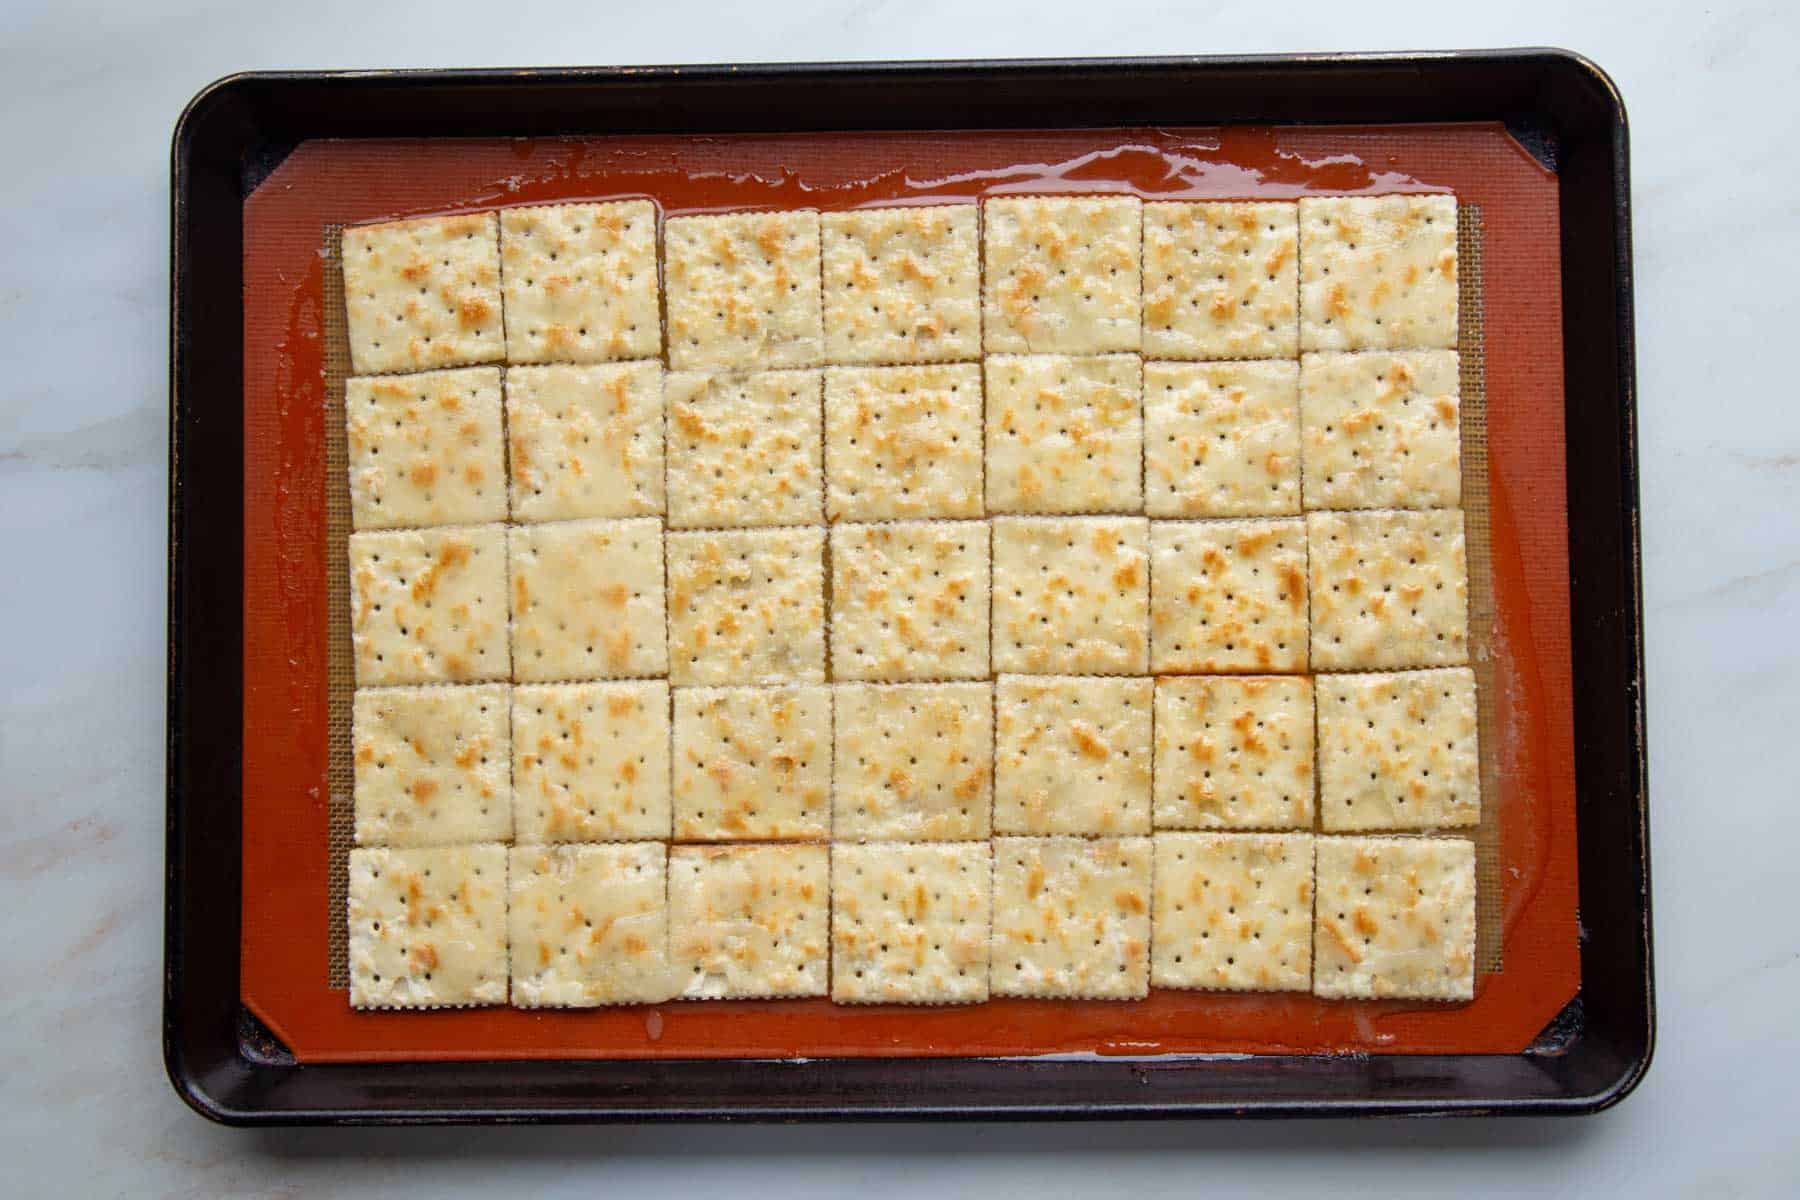 saltine crackers covered with sugar and butter mixture on a silicone lined baking sheet.